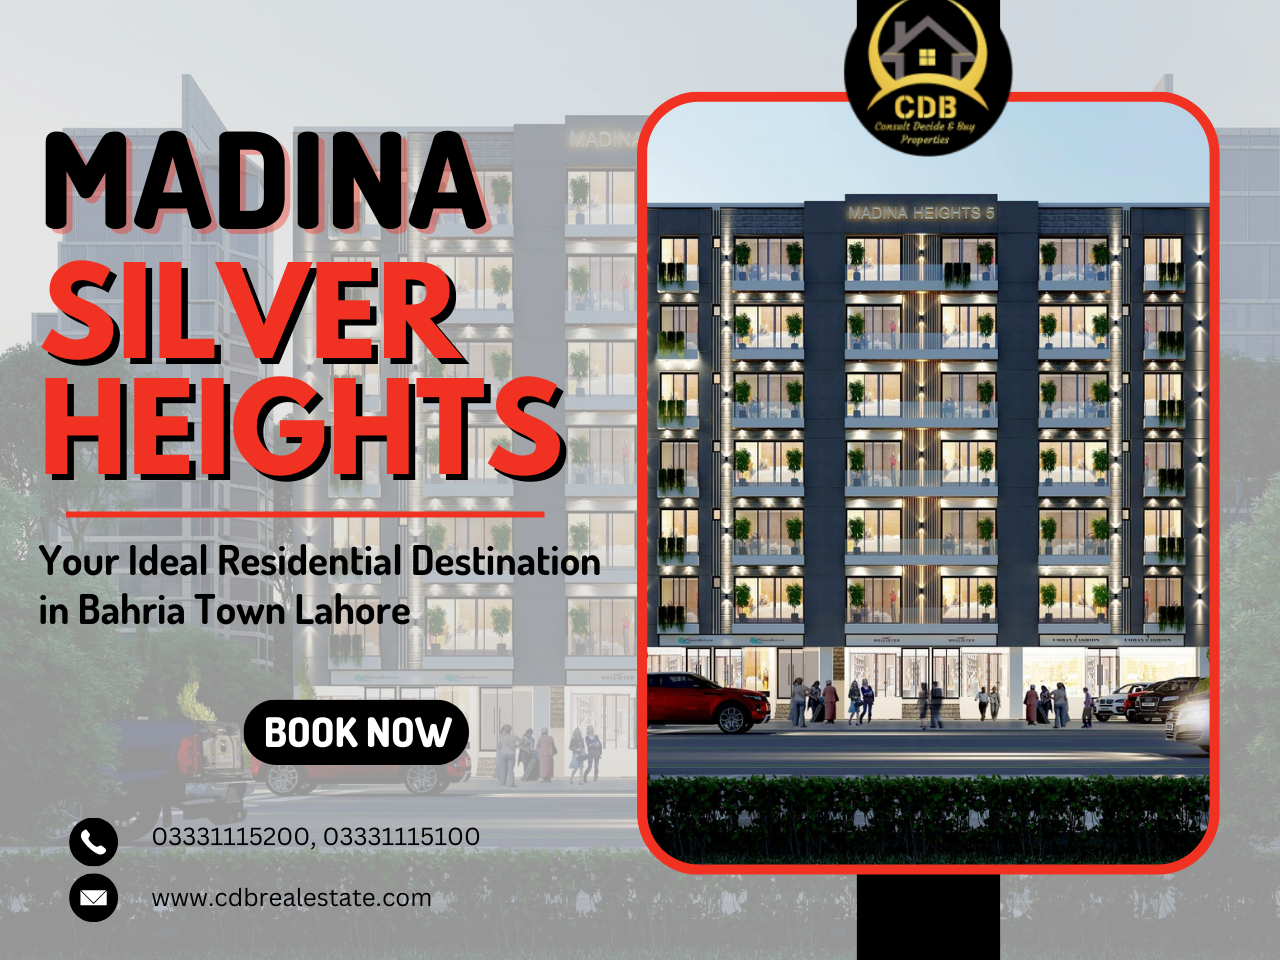 Madina Silver Heights: Your Ideal Residential Destination in Bahria Town Lahore